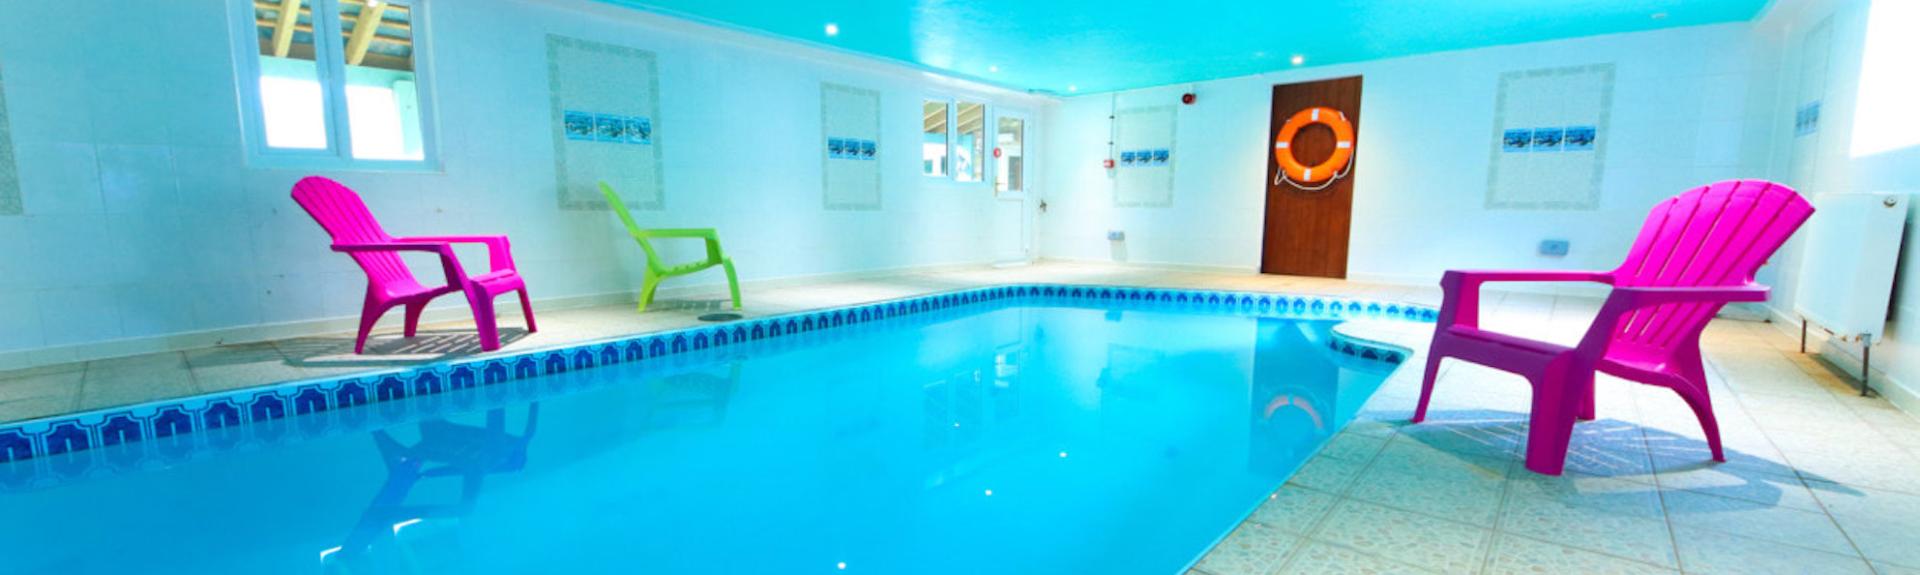 The Indoor Heated Pool at River View Cottage near Honiton, Devon